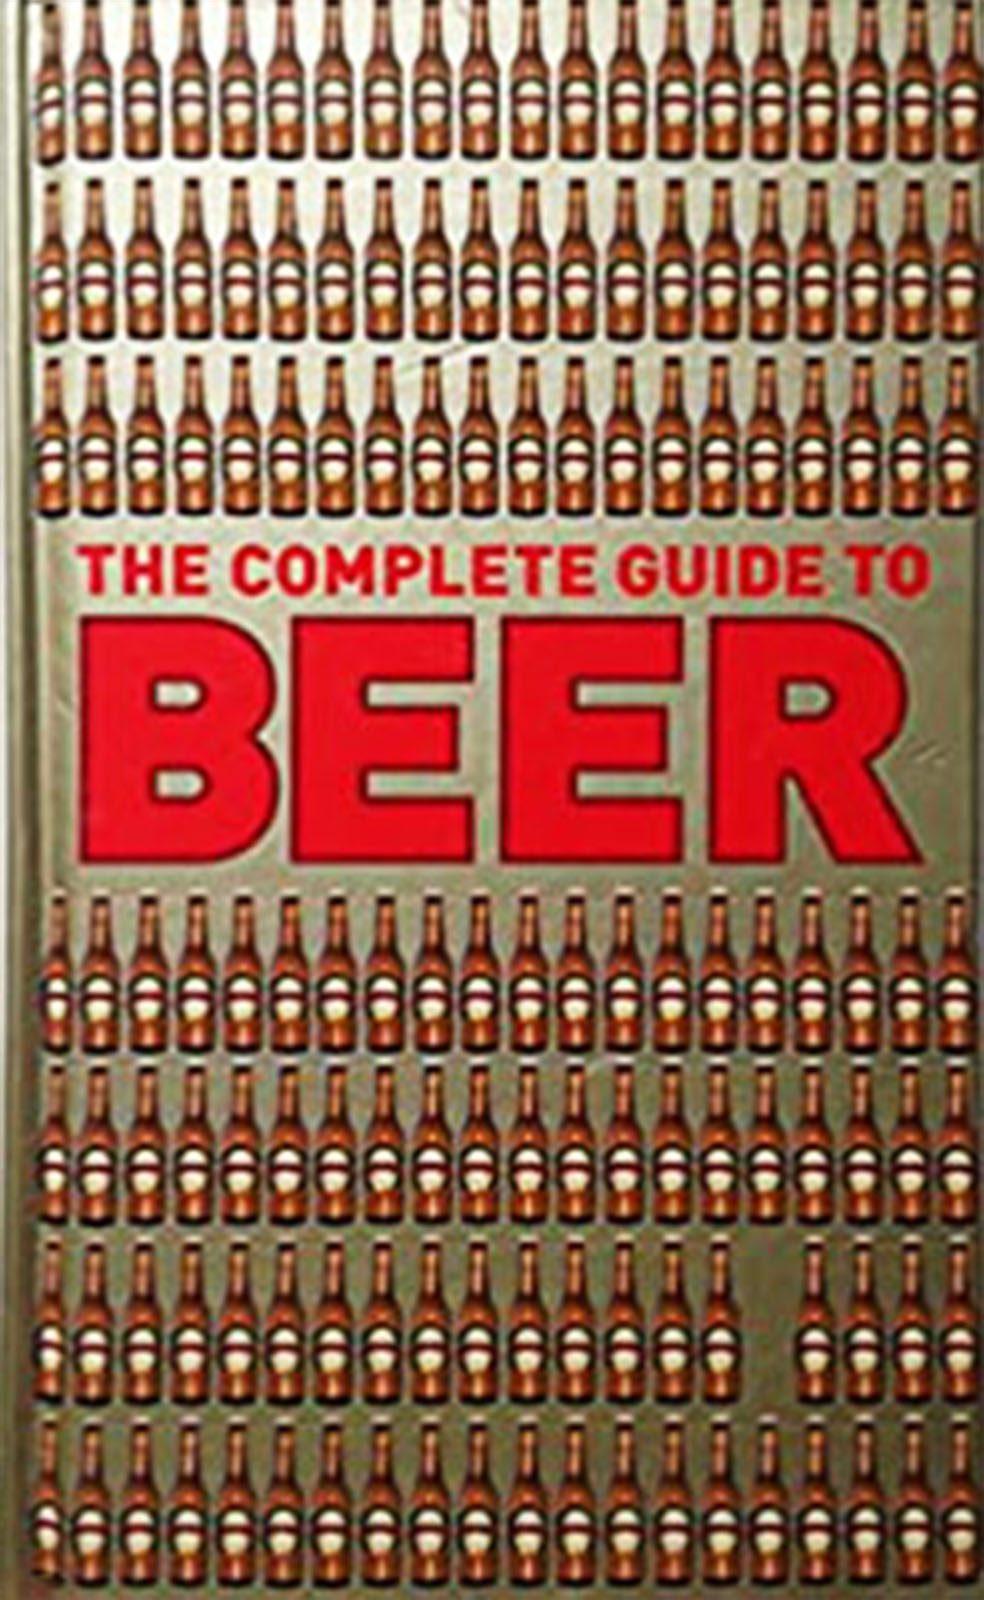 The Complete Guide to Beer (হার্ডকভার)